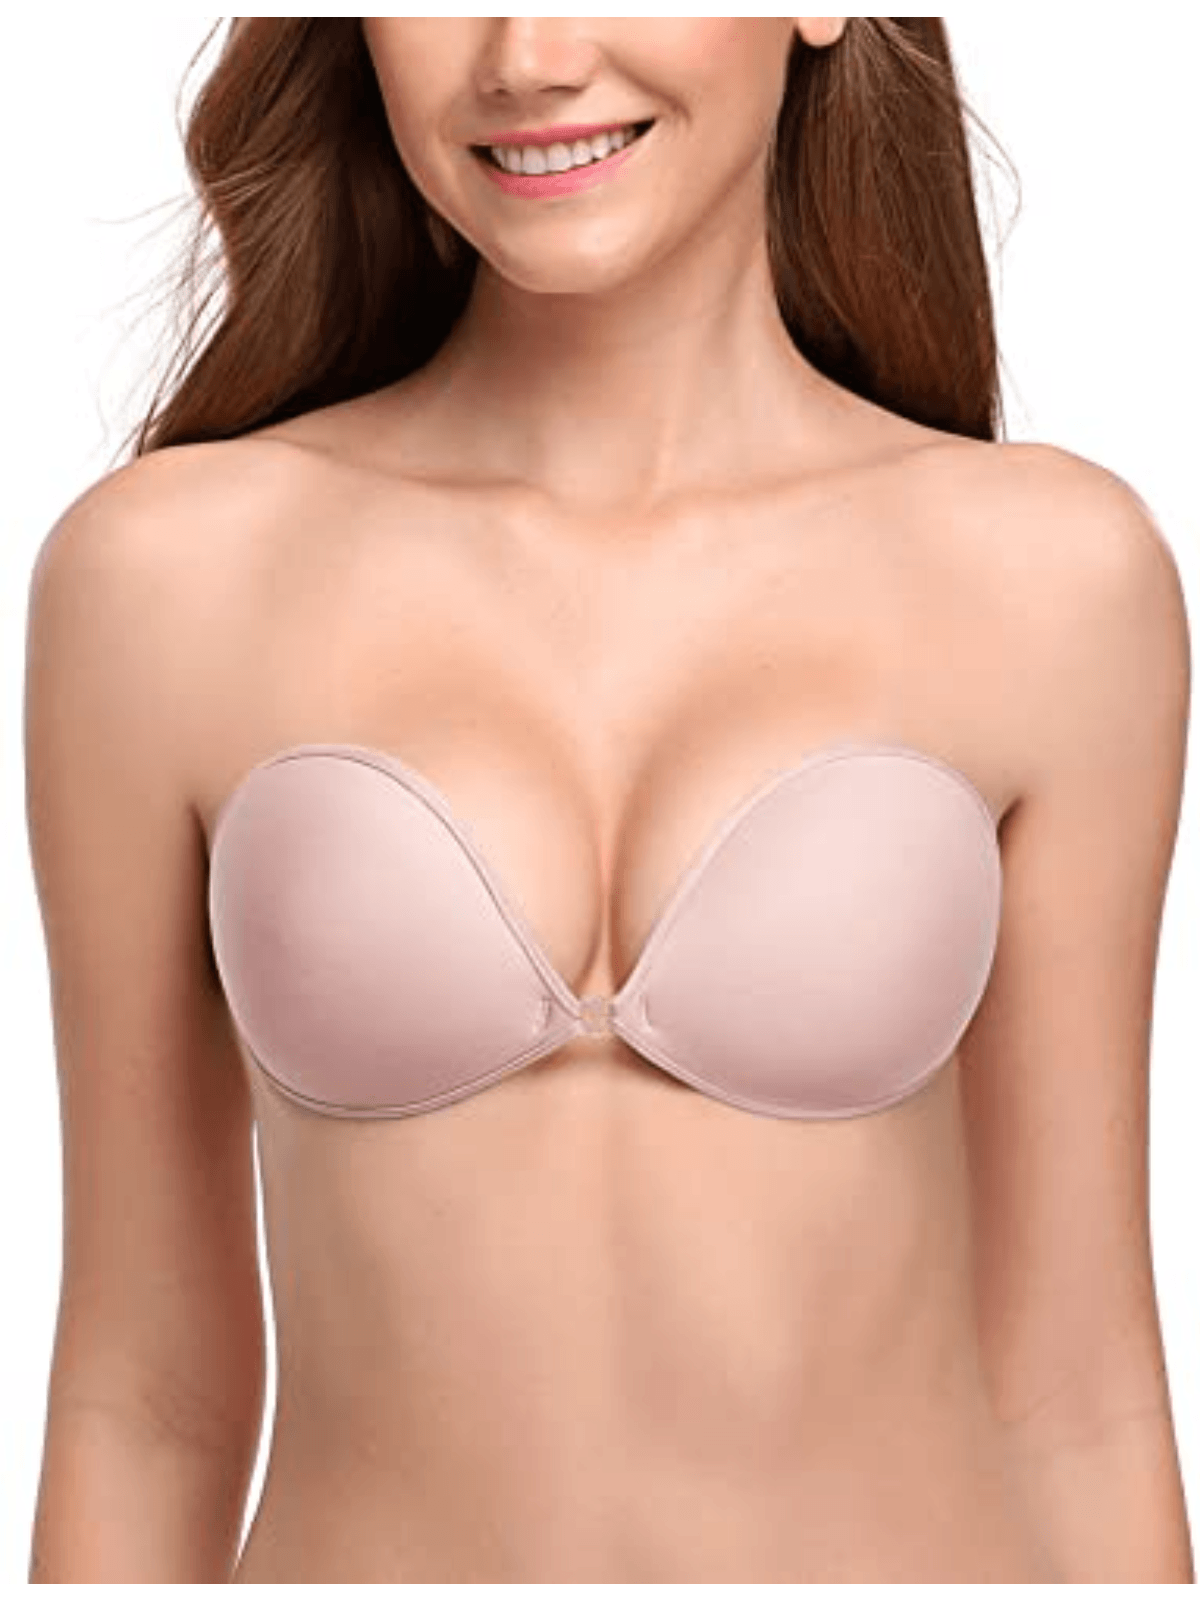 Totally Backless & Strapless Bra w/adhesive clear wing (2 per pack)